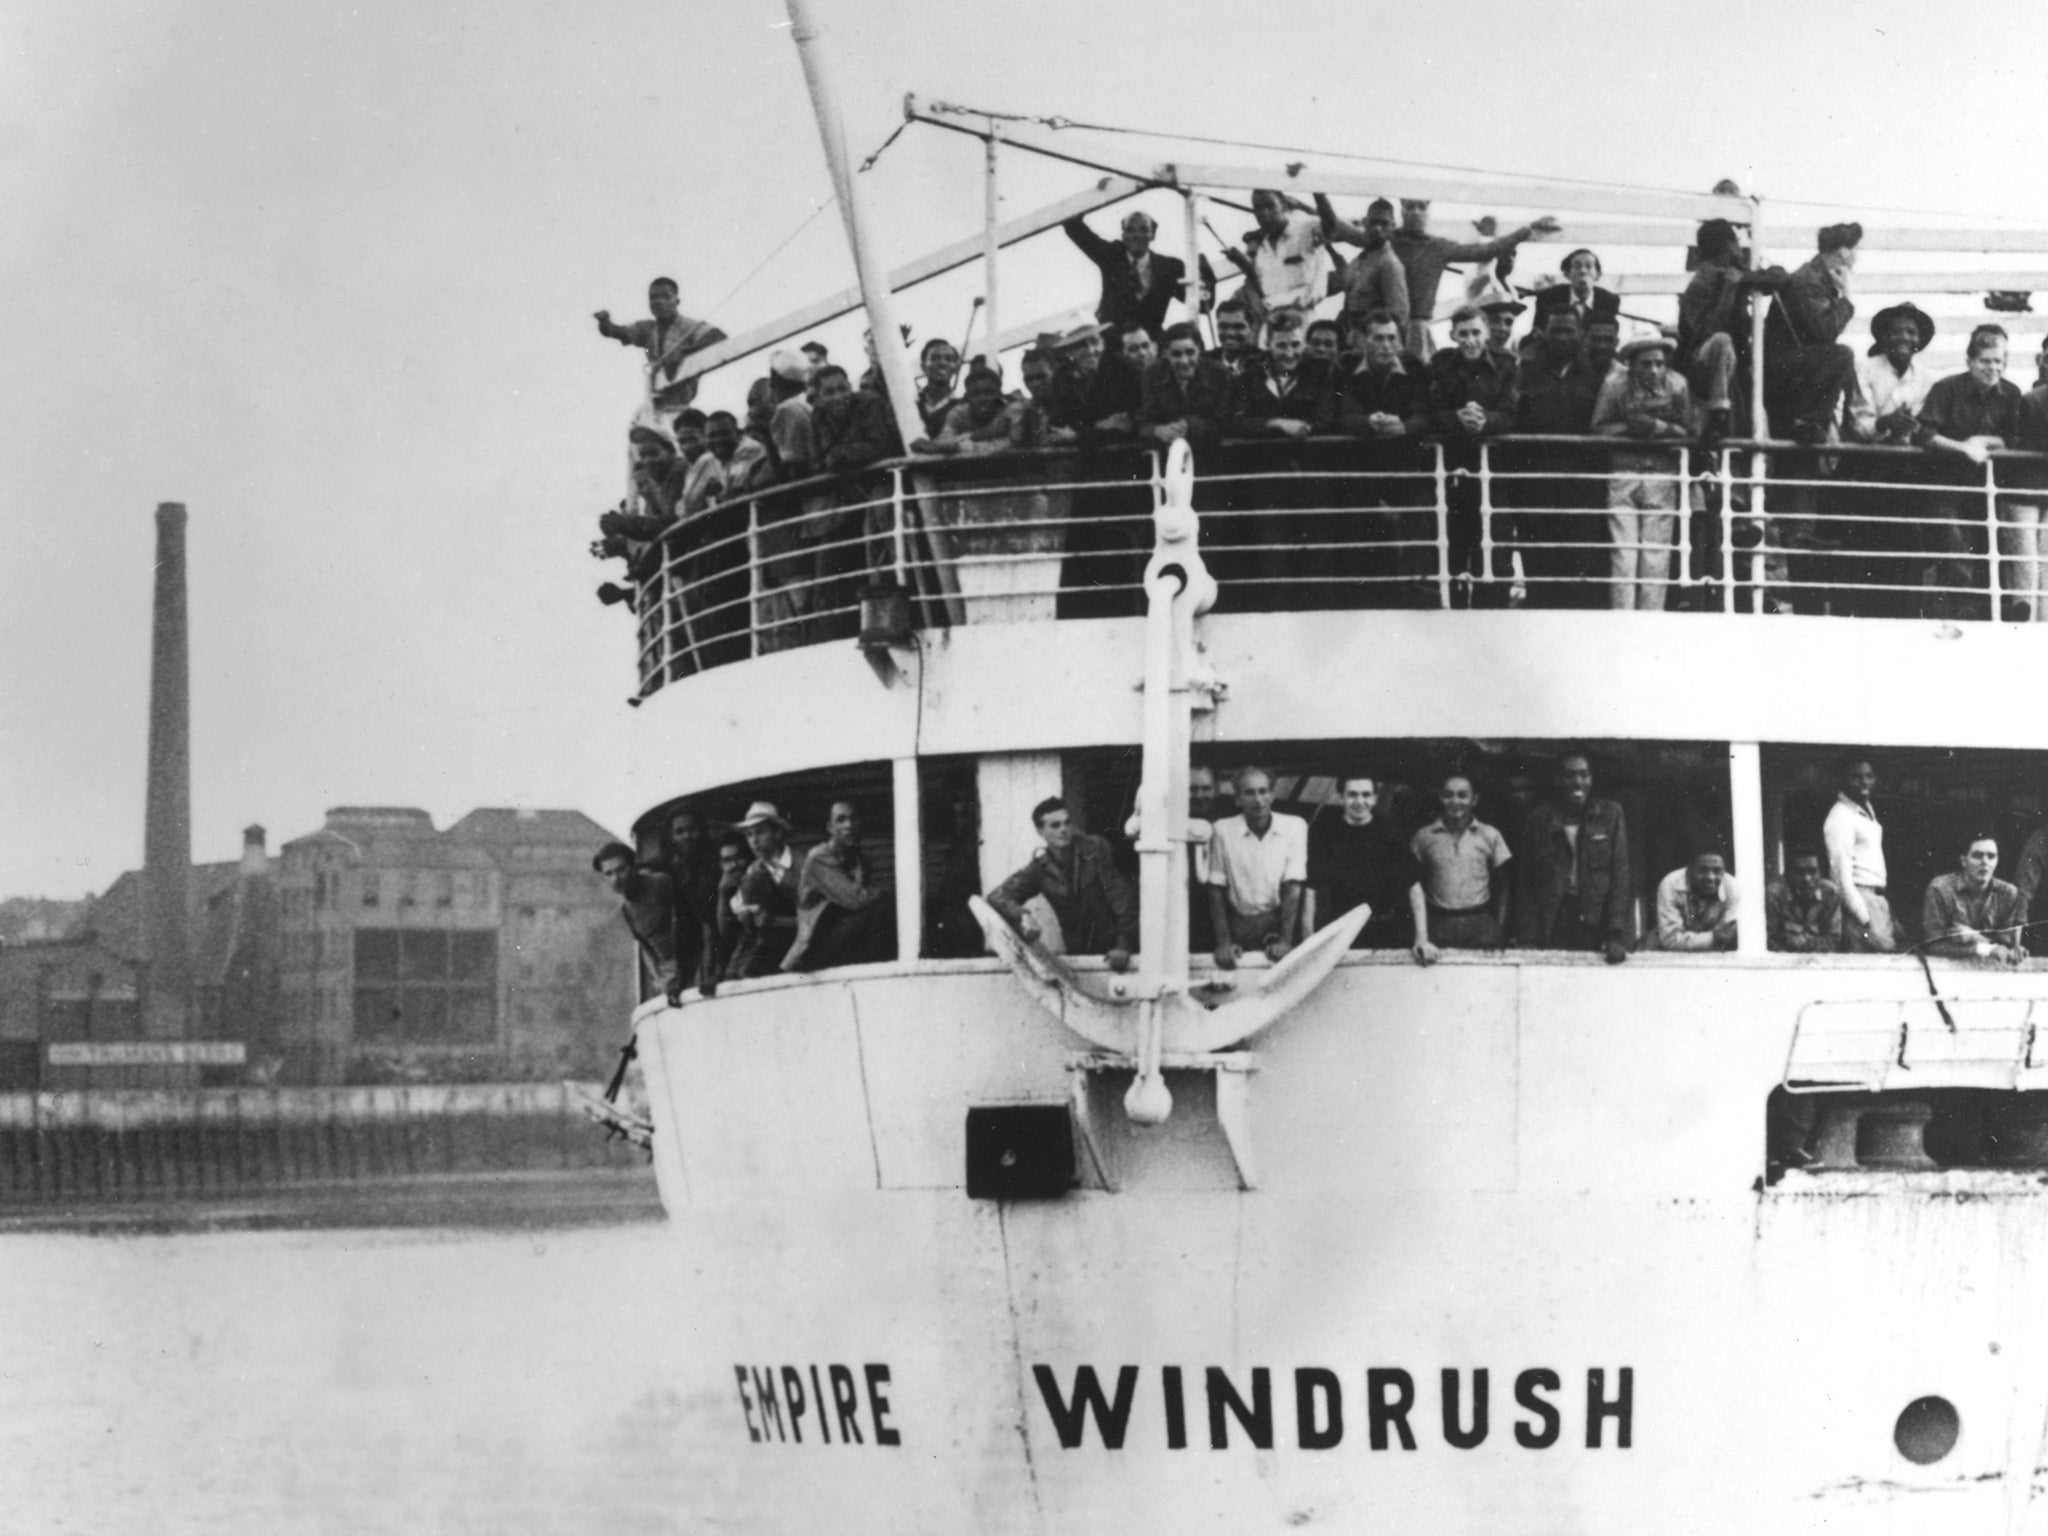 Hundreds of migrants from the Caribbean first came to the UK to work in 1948